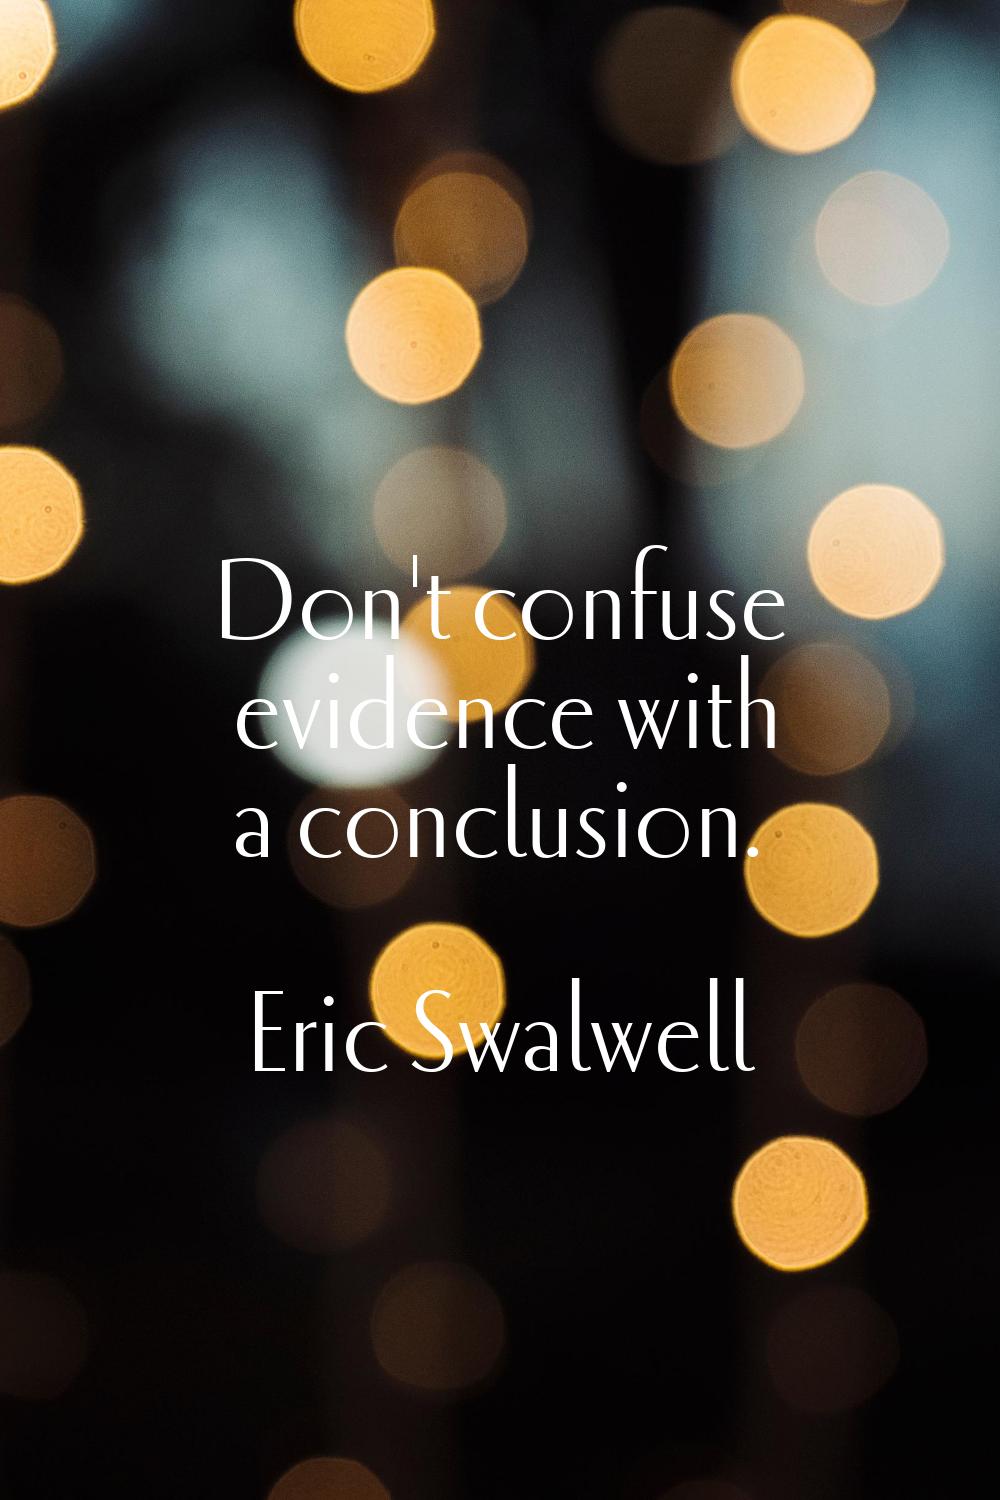 Don't confuse evidence with a conclusion.